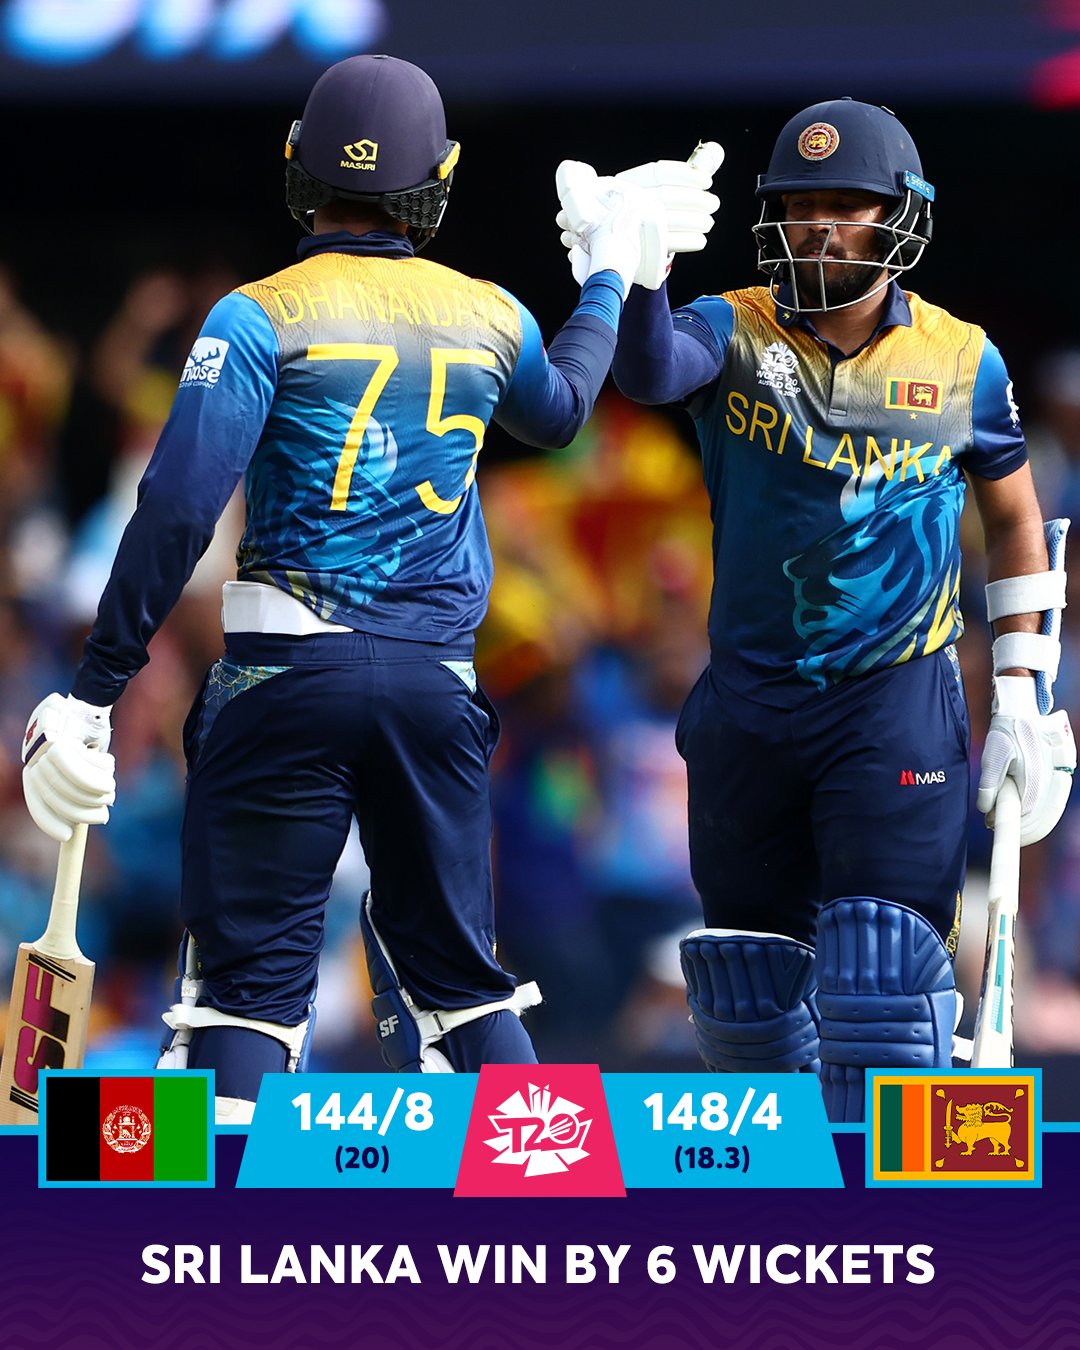 Super 12 stage of the T20, Sri Lanka defeated Afghanistan by 6 wickets and maintained their hopes of reaching the semi-finals.